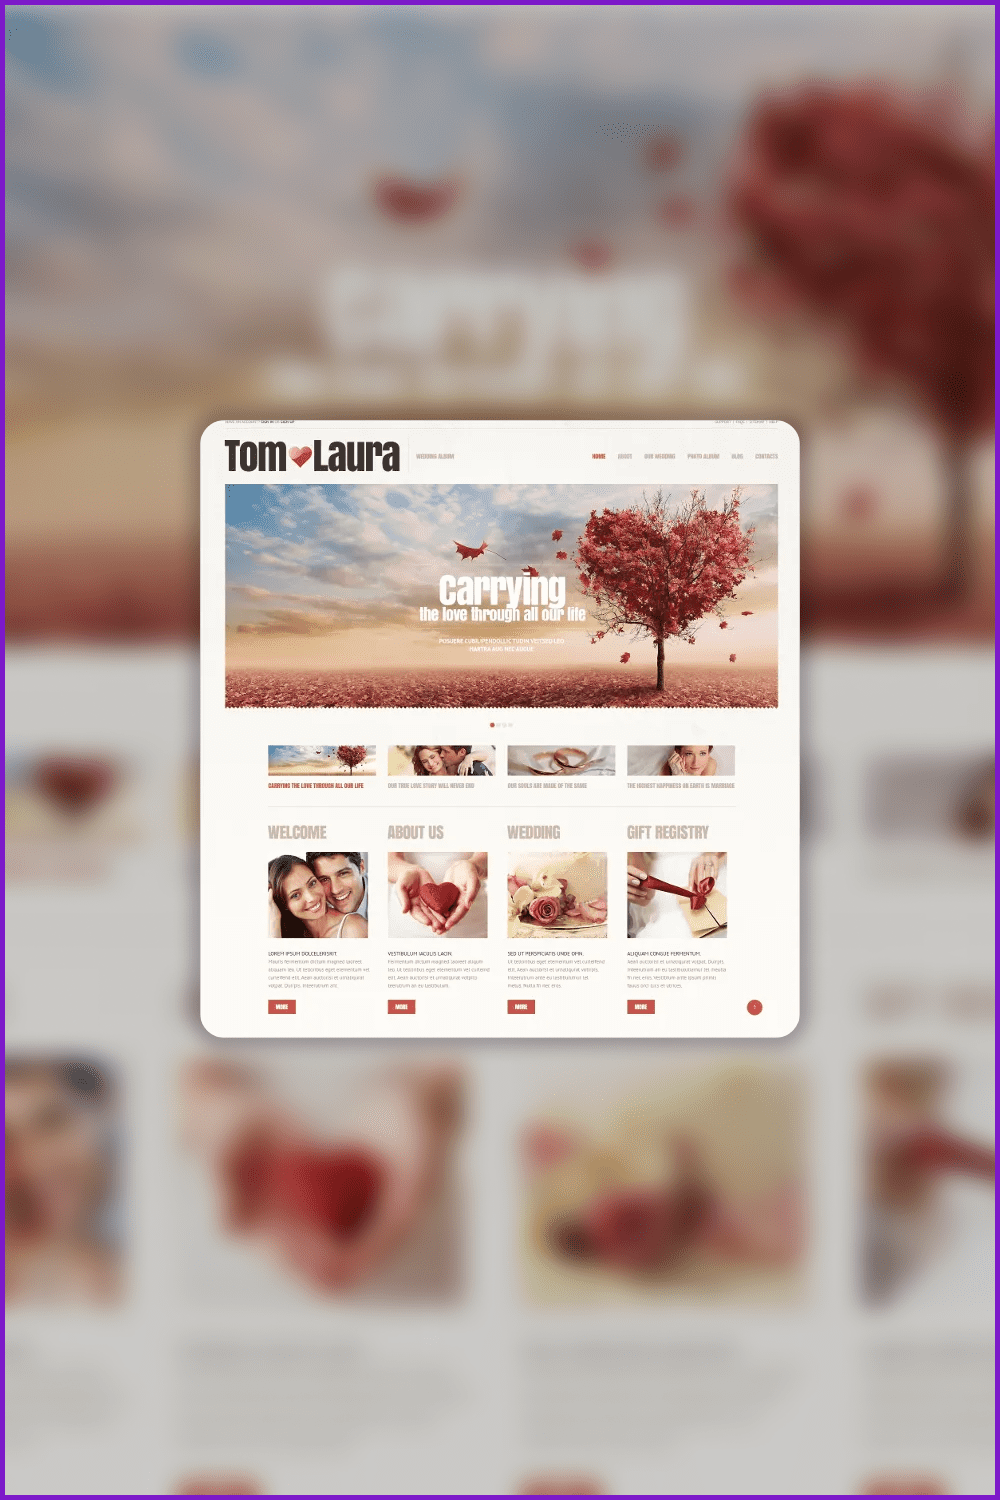 Screenshot of the site page with a photo album of wedding photos.